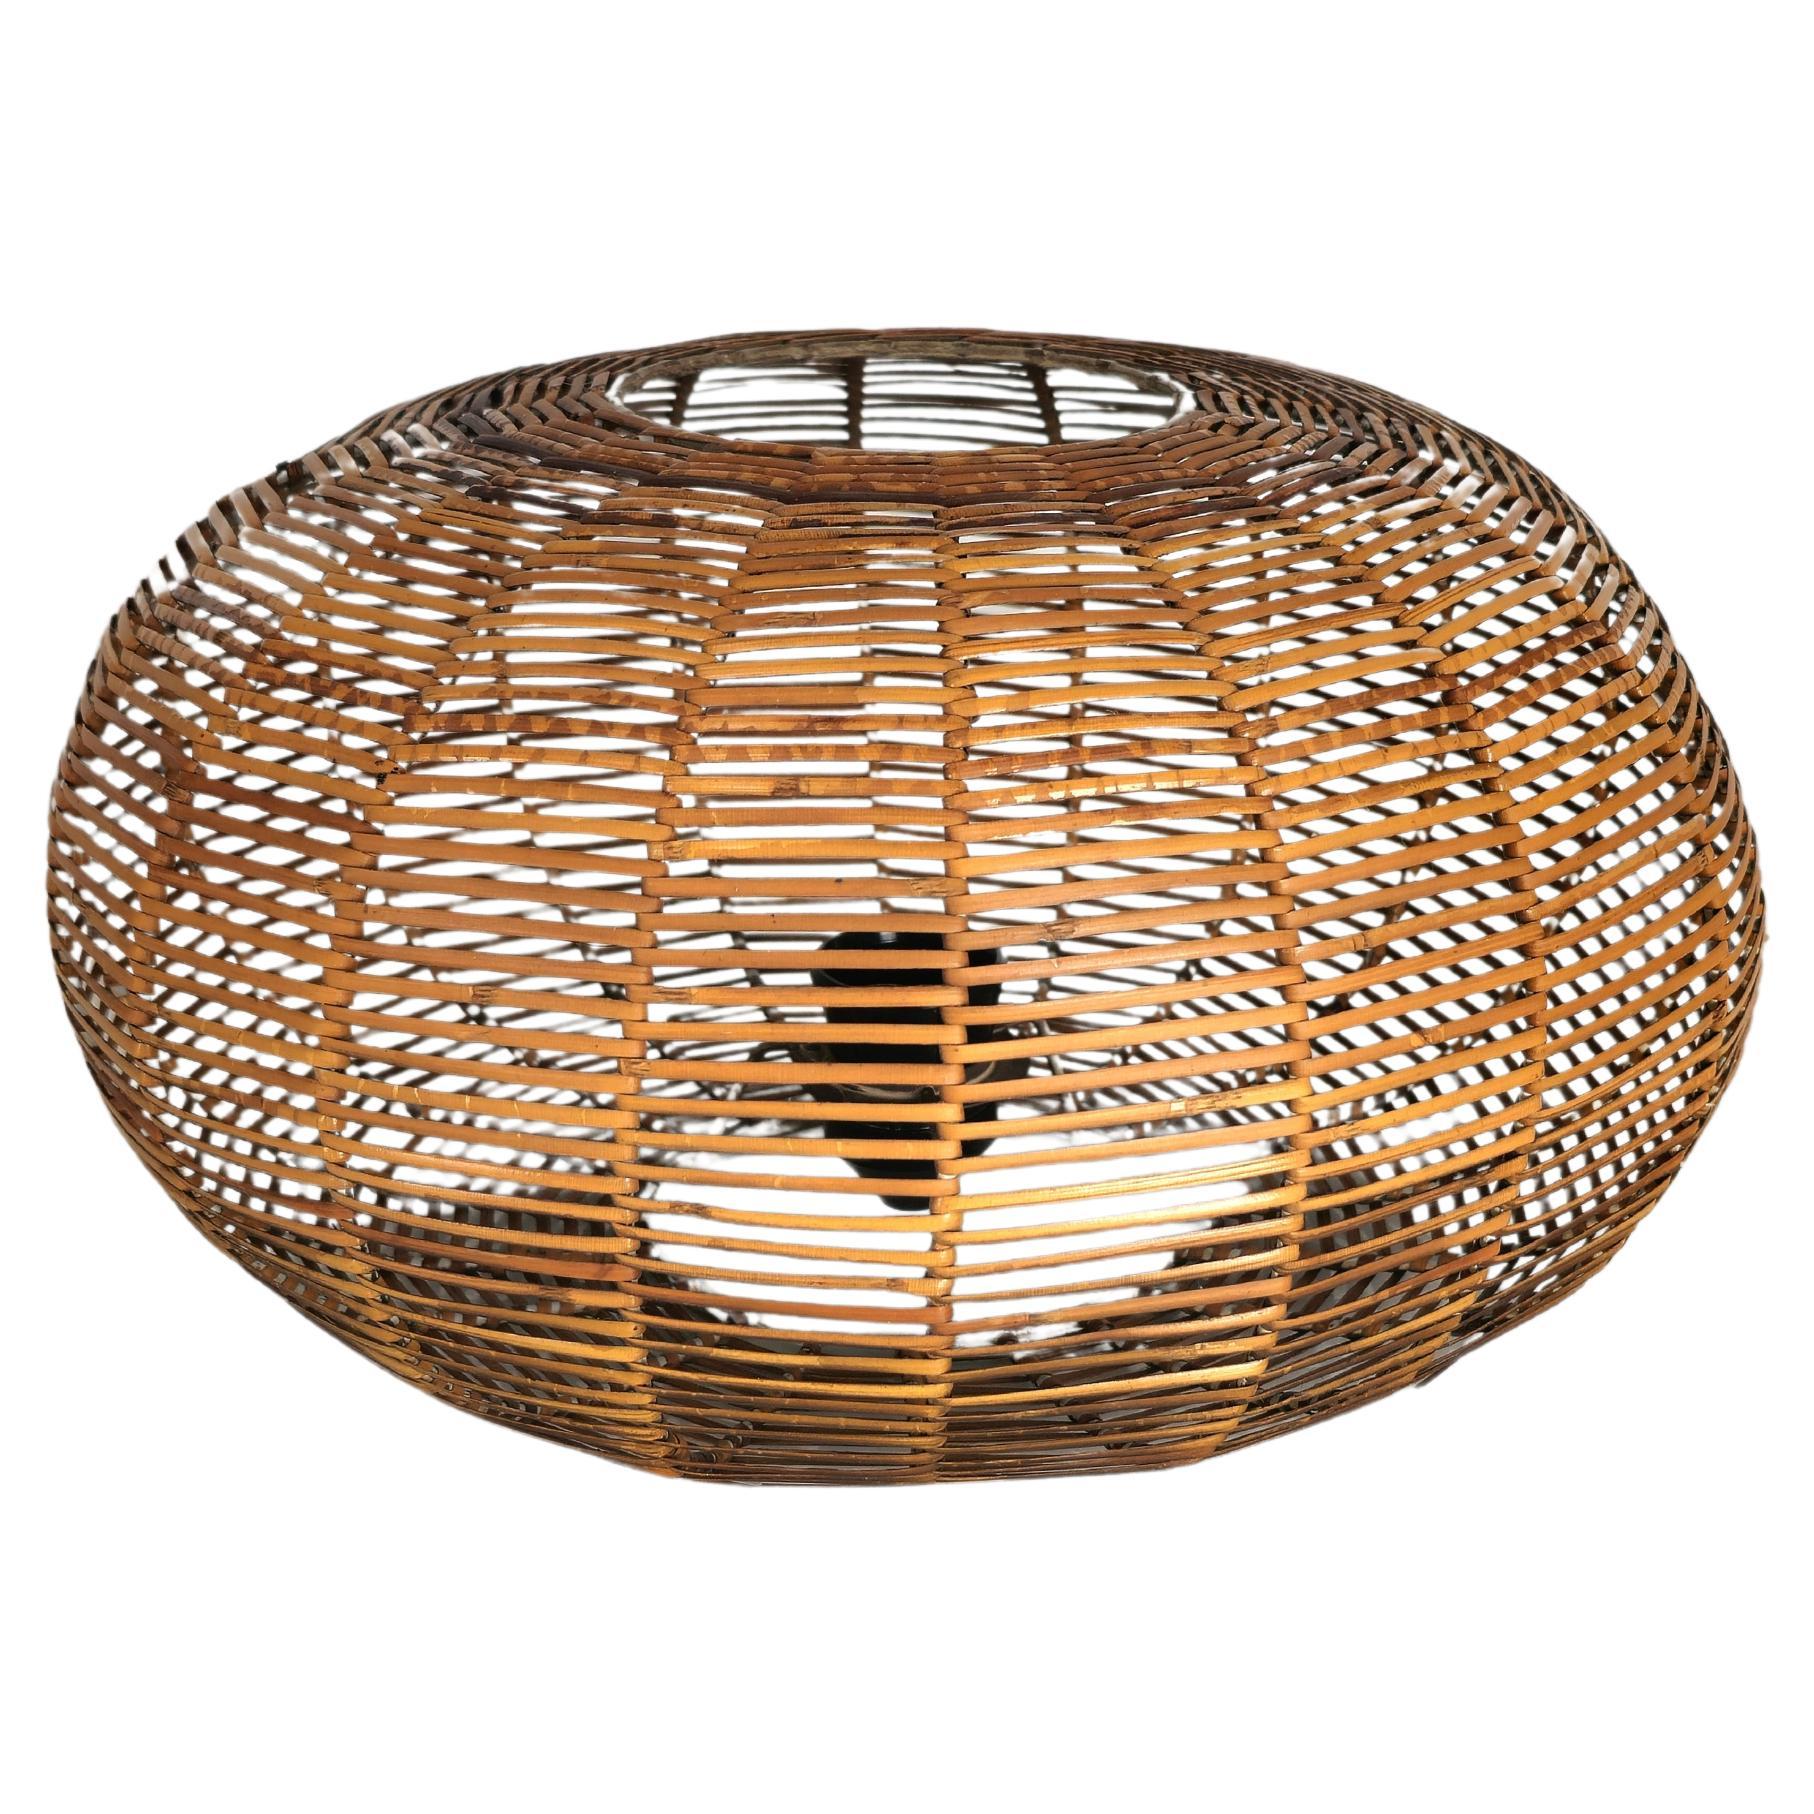 Ellipsoidal shaped table lamp made of enamelled metal and rattan. Made in Italy in the 70s.